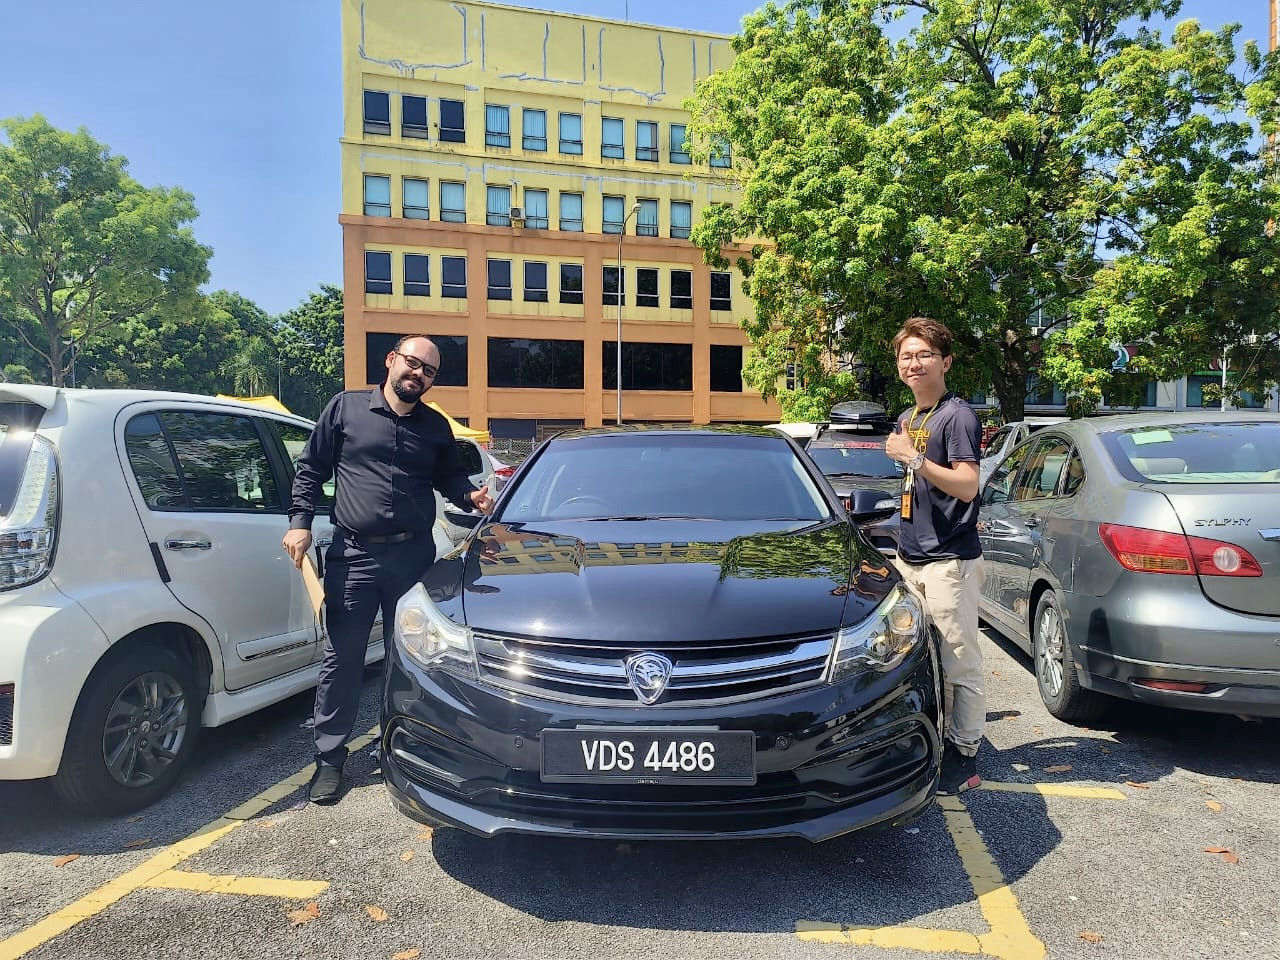 Proton Perdana : bought my car 1 week ago . service vip . specially KC really take care of costumers and is helpful. im happy with their service and recommended